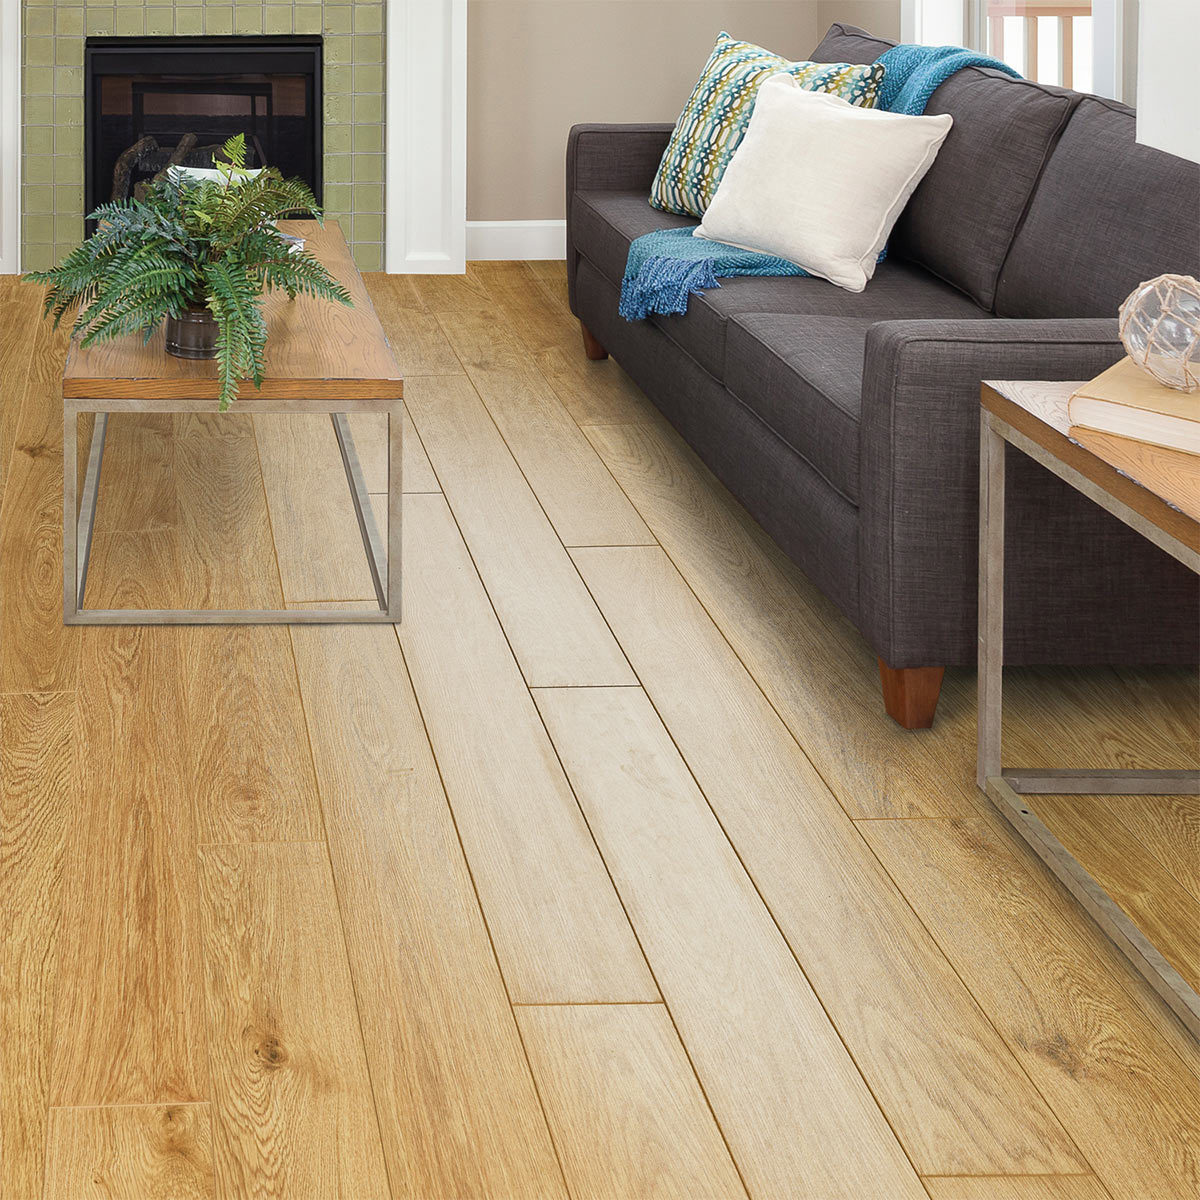 5 Best Laminate Flooring Colours For, What Colour Laminate Flooring Goes With Oak Furniture